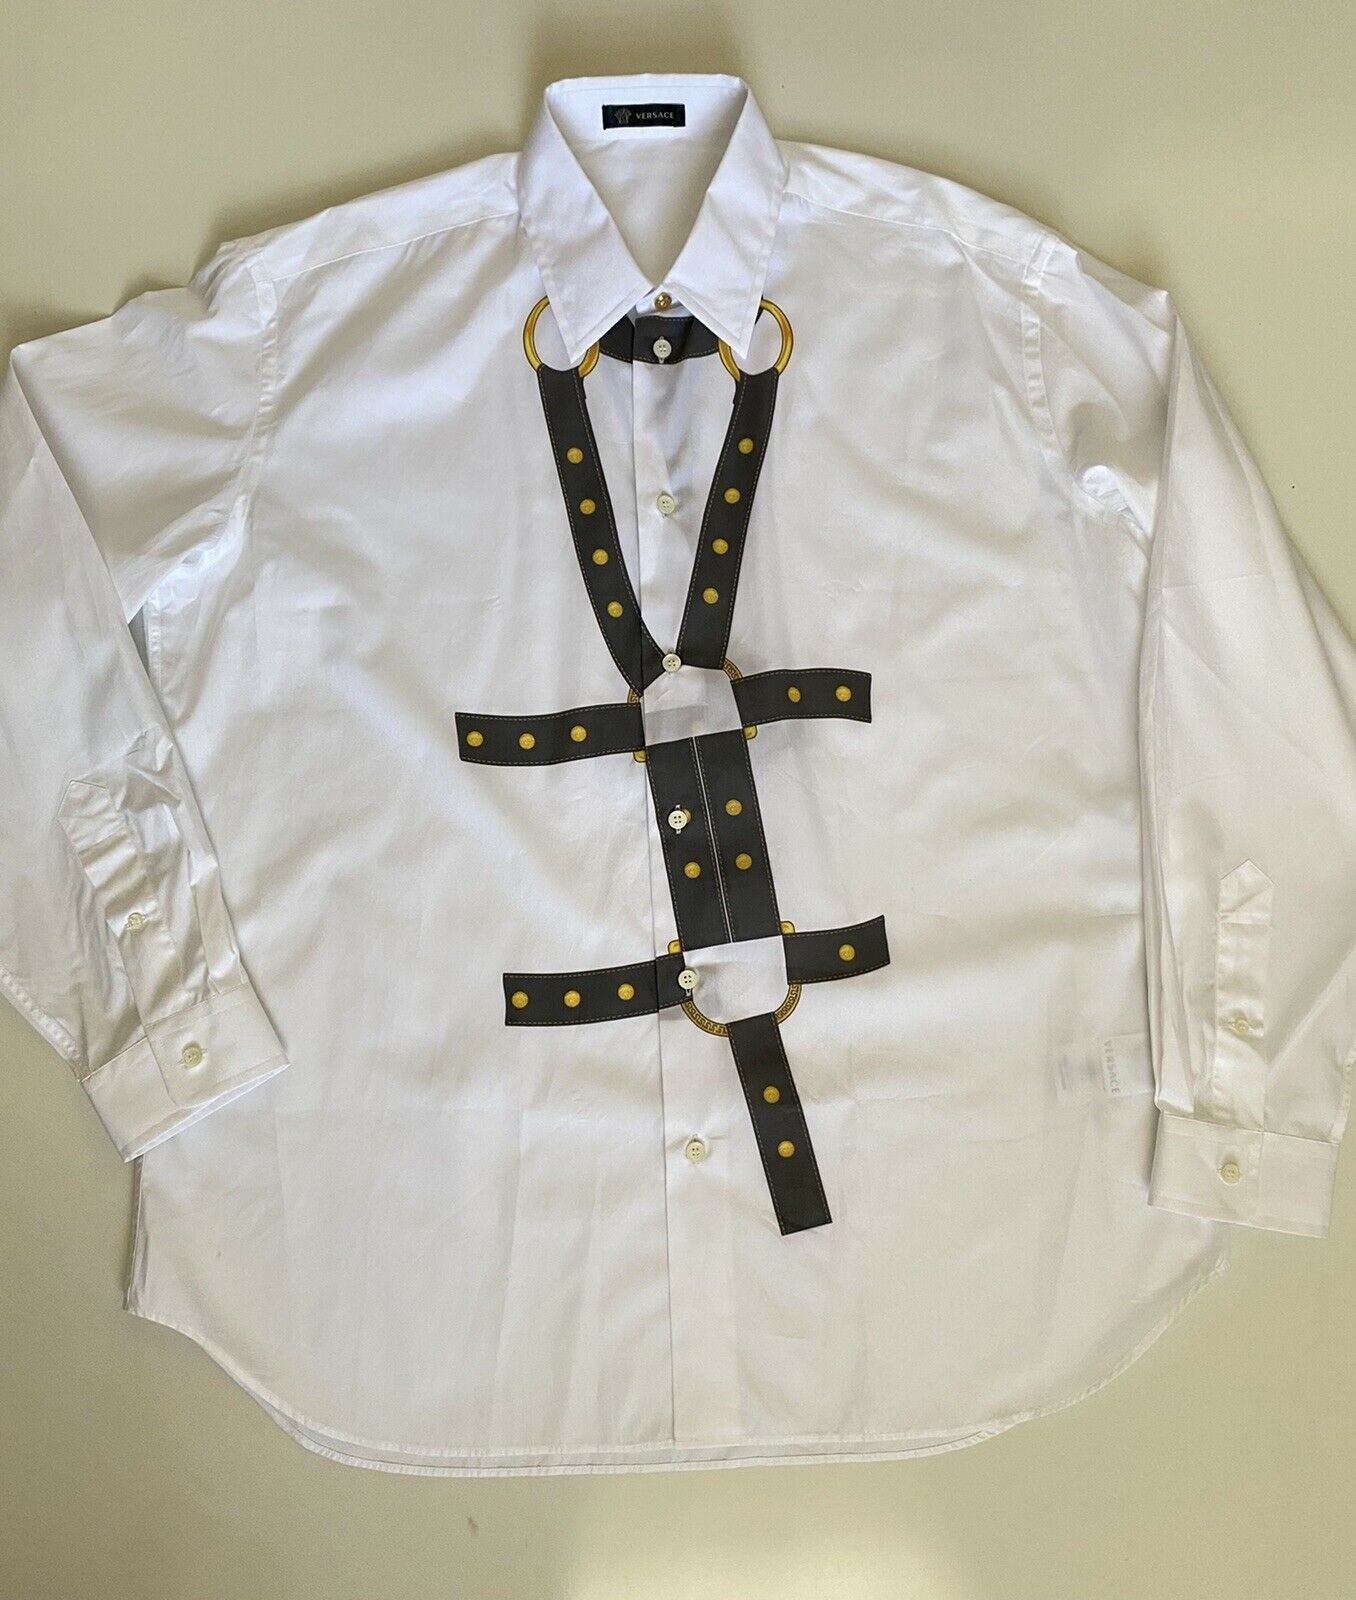 NWT $650 Versace Harness Print Graphic White Dress Shirt Size 41 A83678 Italy